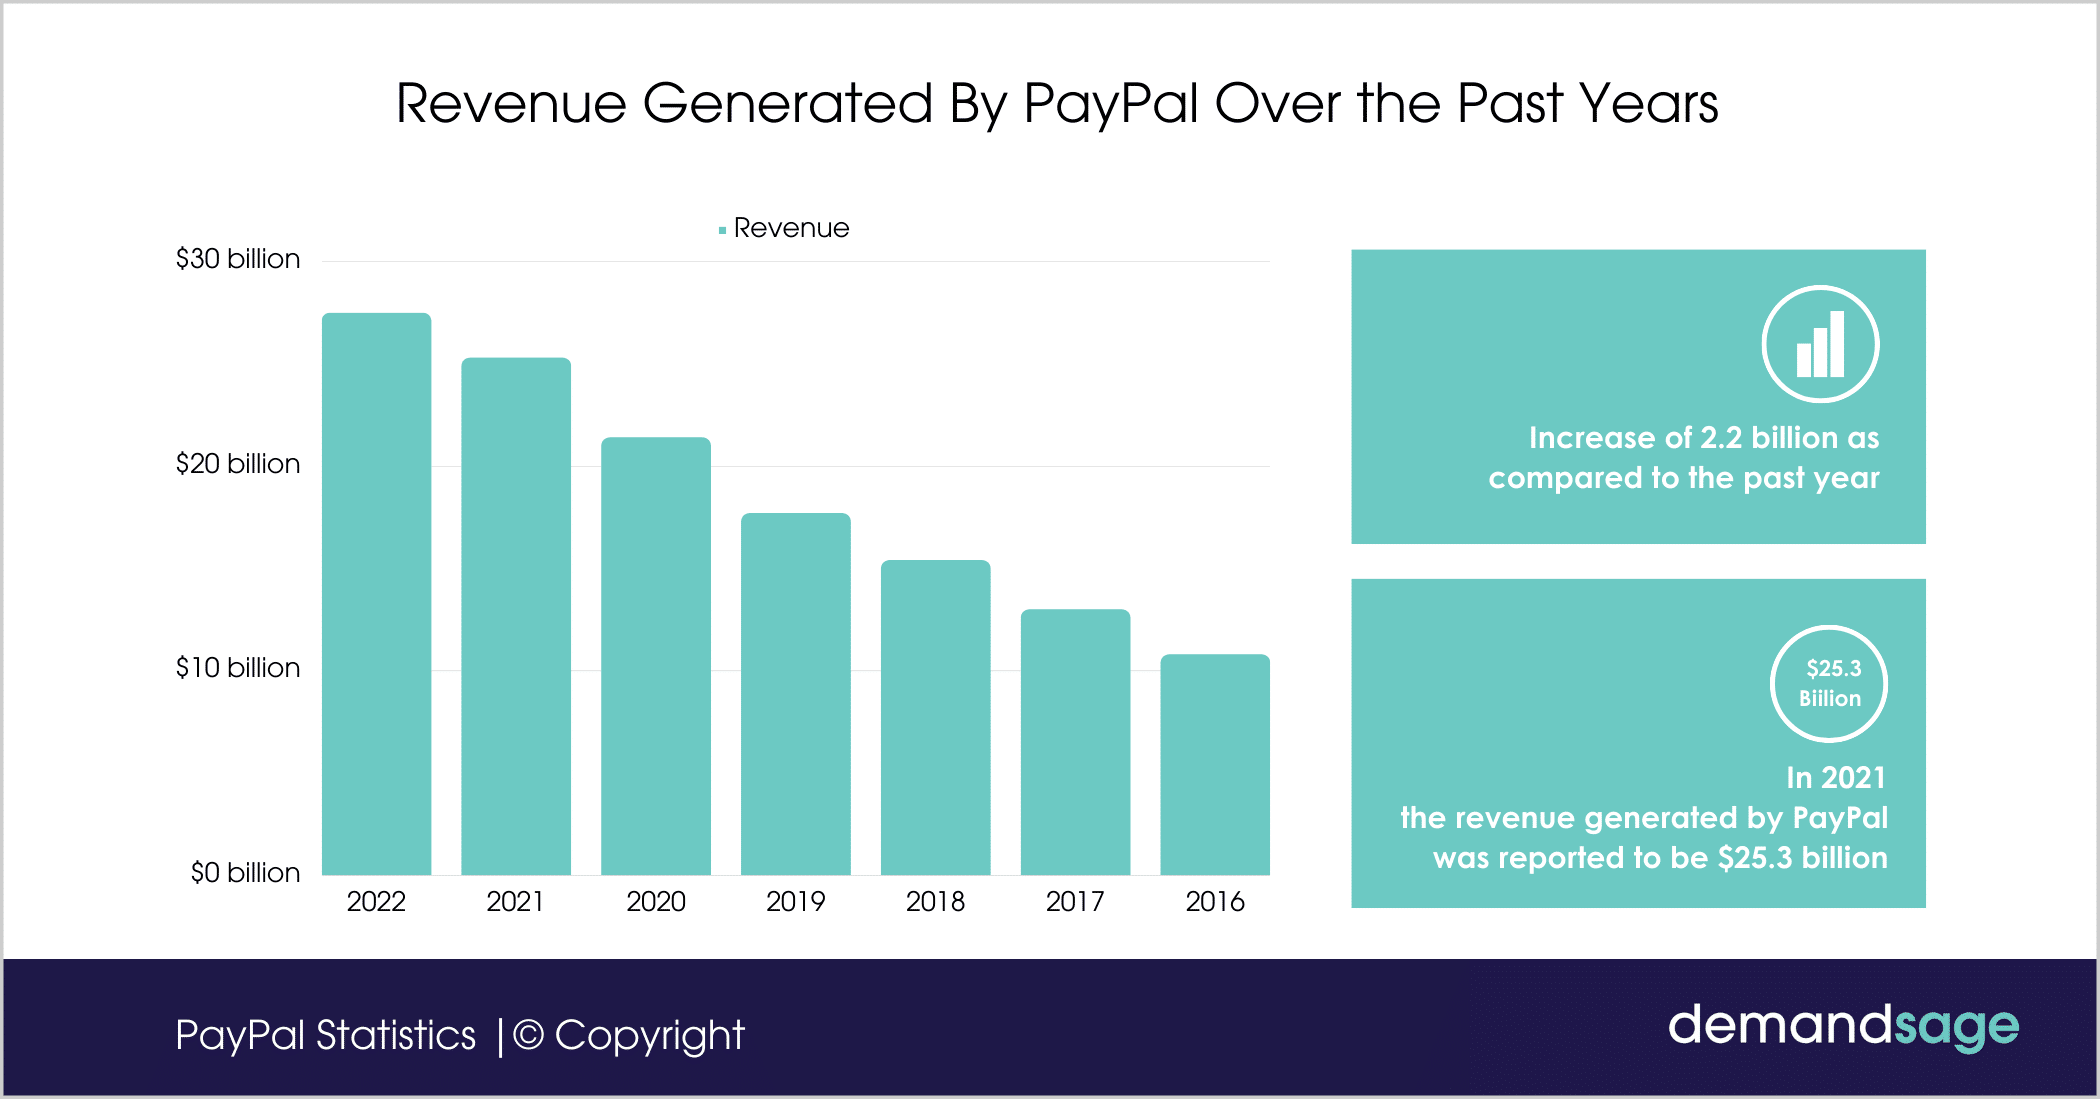 Revenue Generated By PayPal Over the Past Years